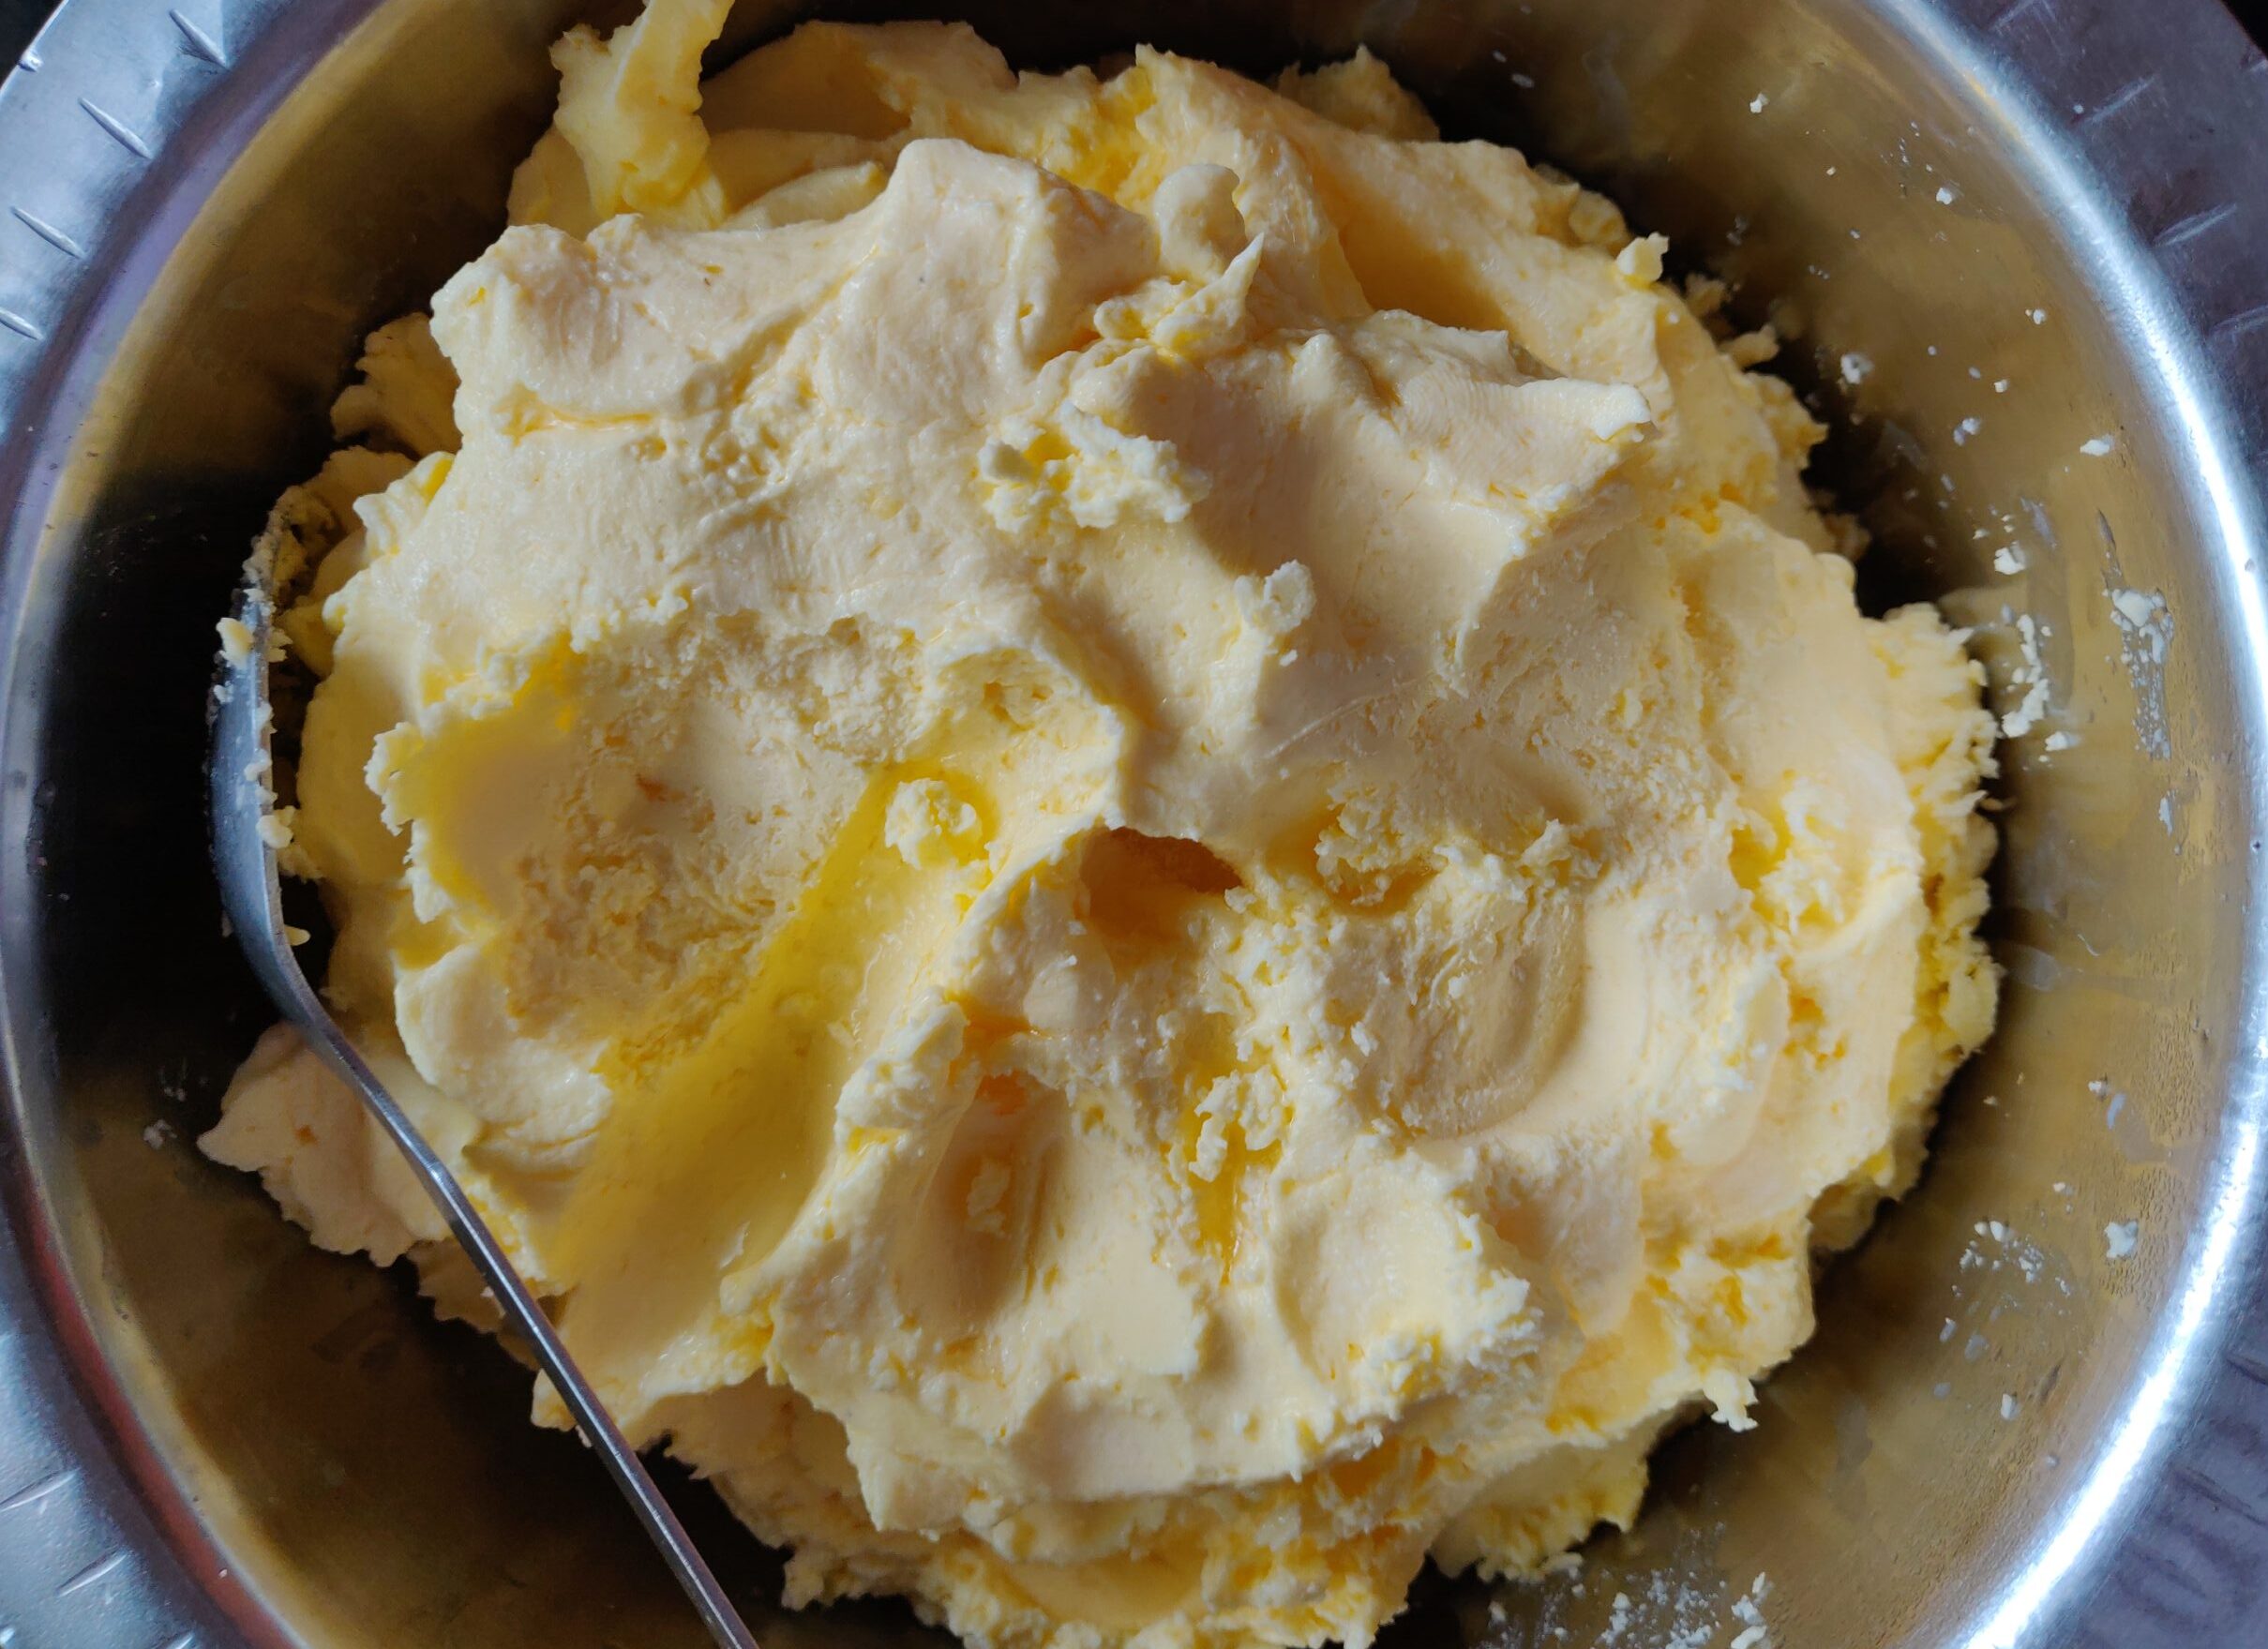 A bowl filled with liquid gold aka pure ghee.